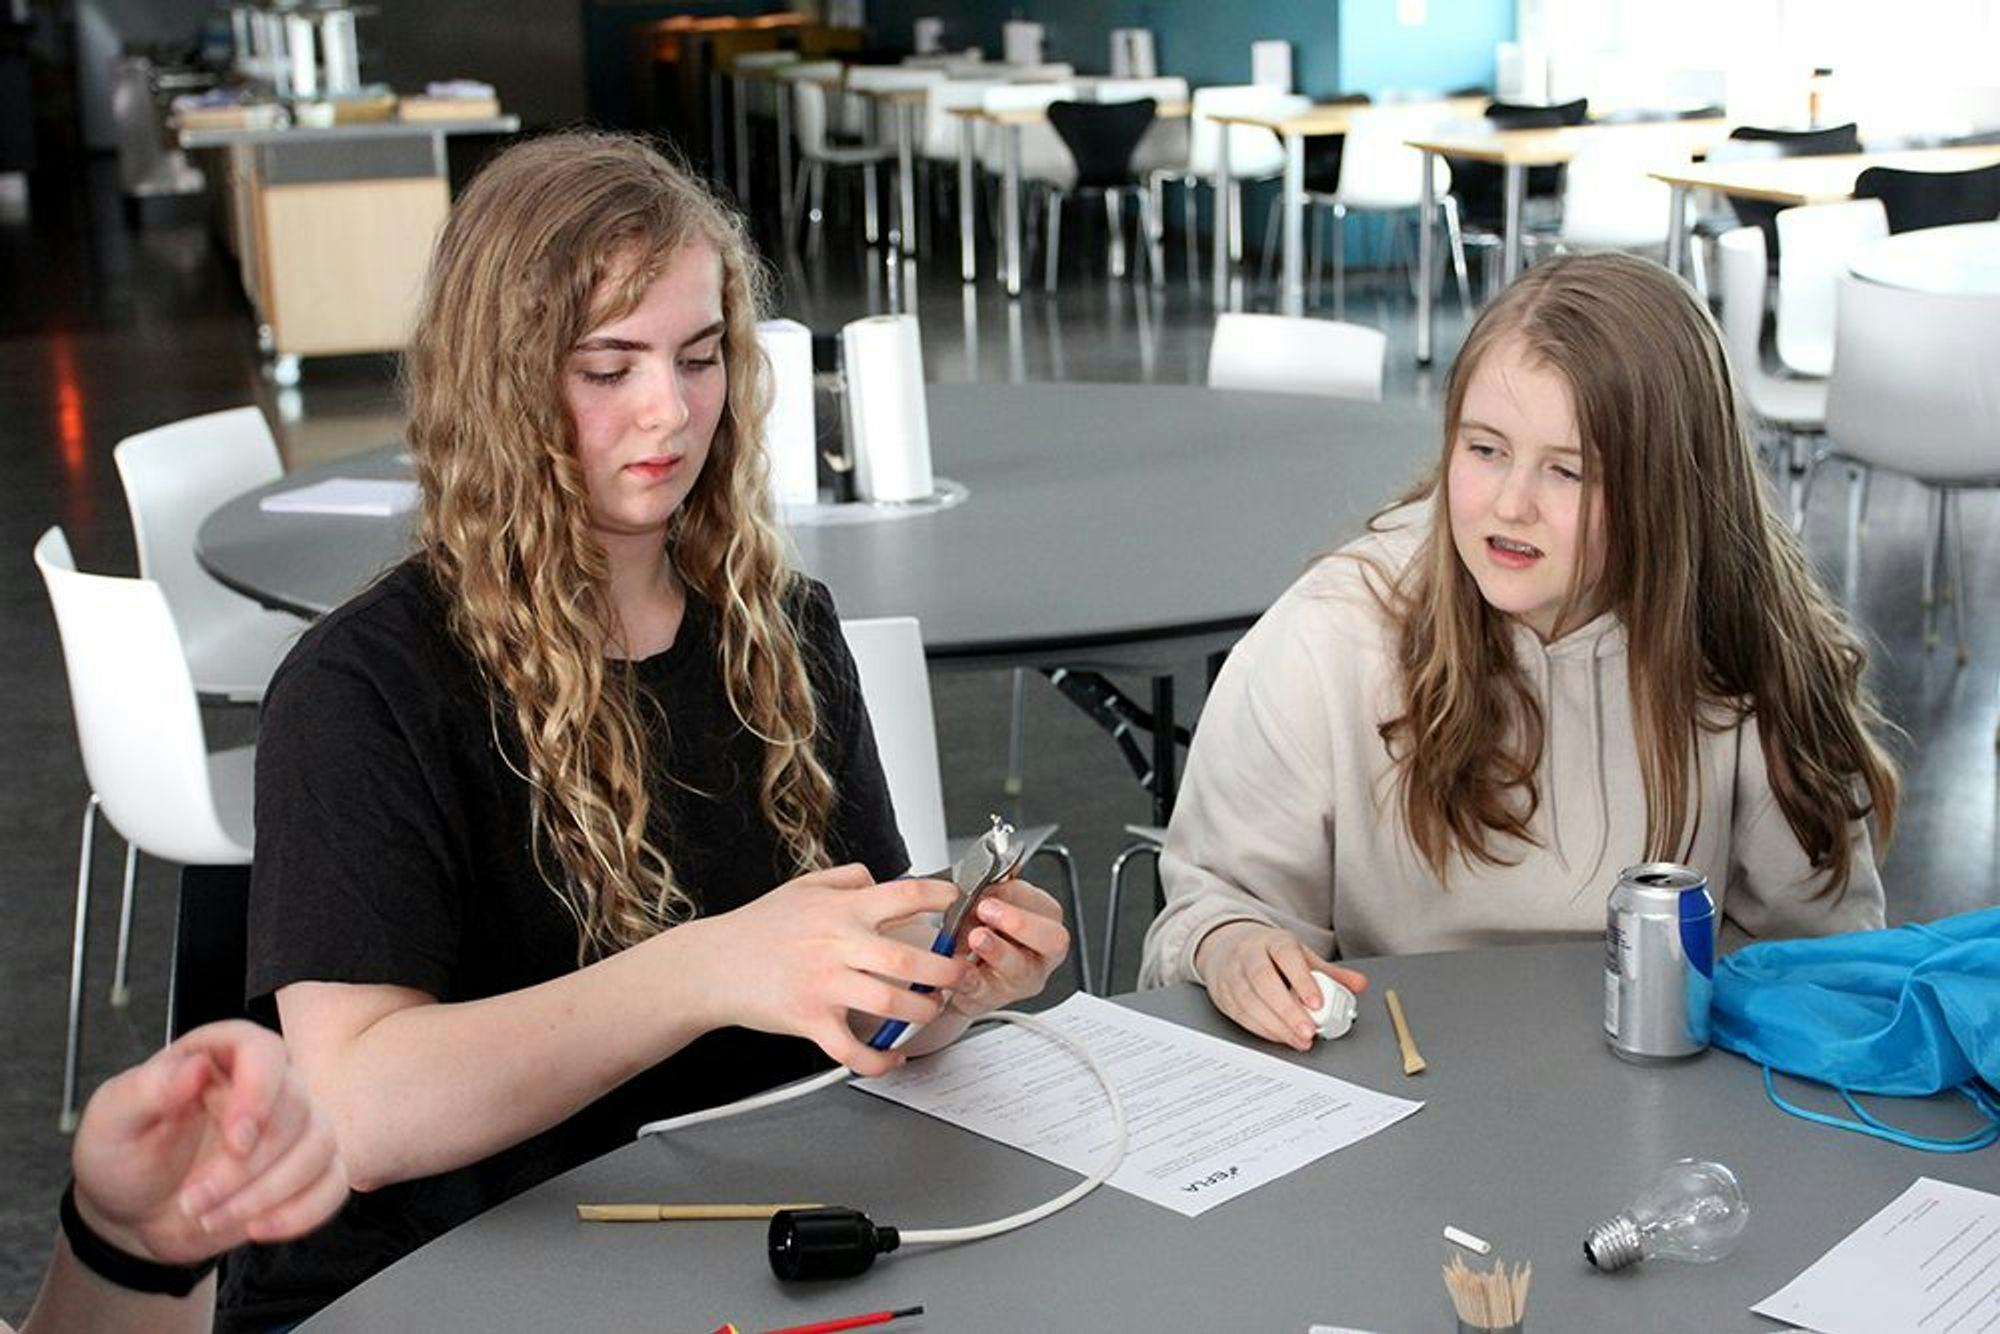 A girl cutting wires using plier next to another one observing the task with great focus